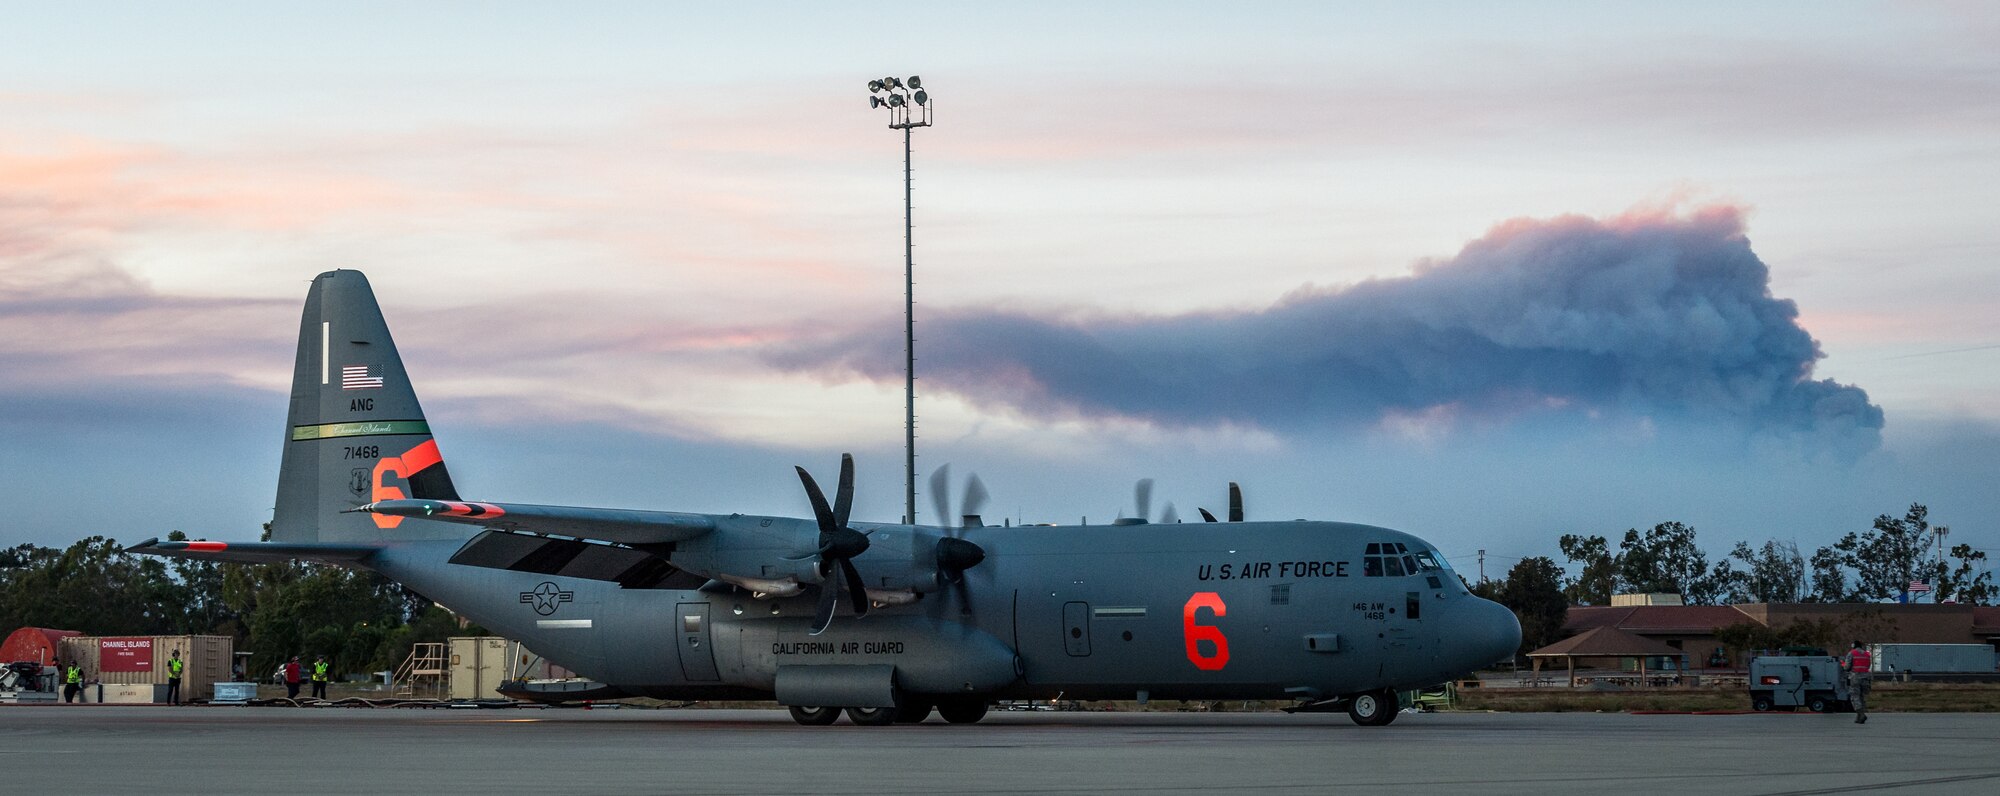 A C-130J of the 146th Airlift Wing, which carries the Modular Airborne Fire Fighting System (MAFFS), prepares to taxi for takeoff after being reloaded with flame retardant chemicals at Channel Islands Air National Guard Base in Port Hueneme, California, Dec. 9, 2017.(U.S. Air Force photo by J.M. Eddins Jr.)